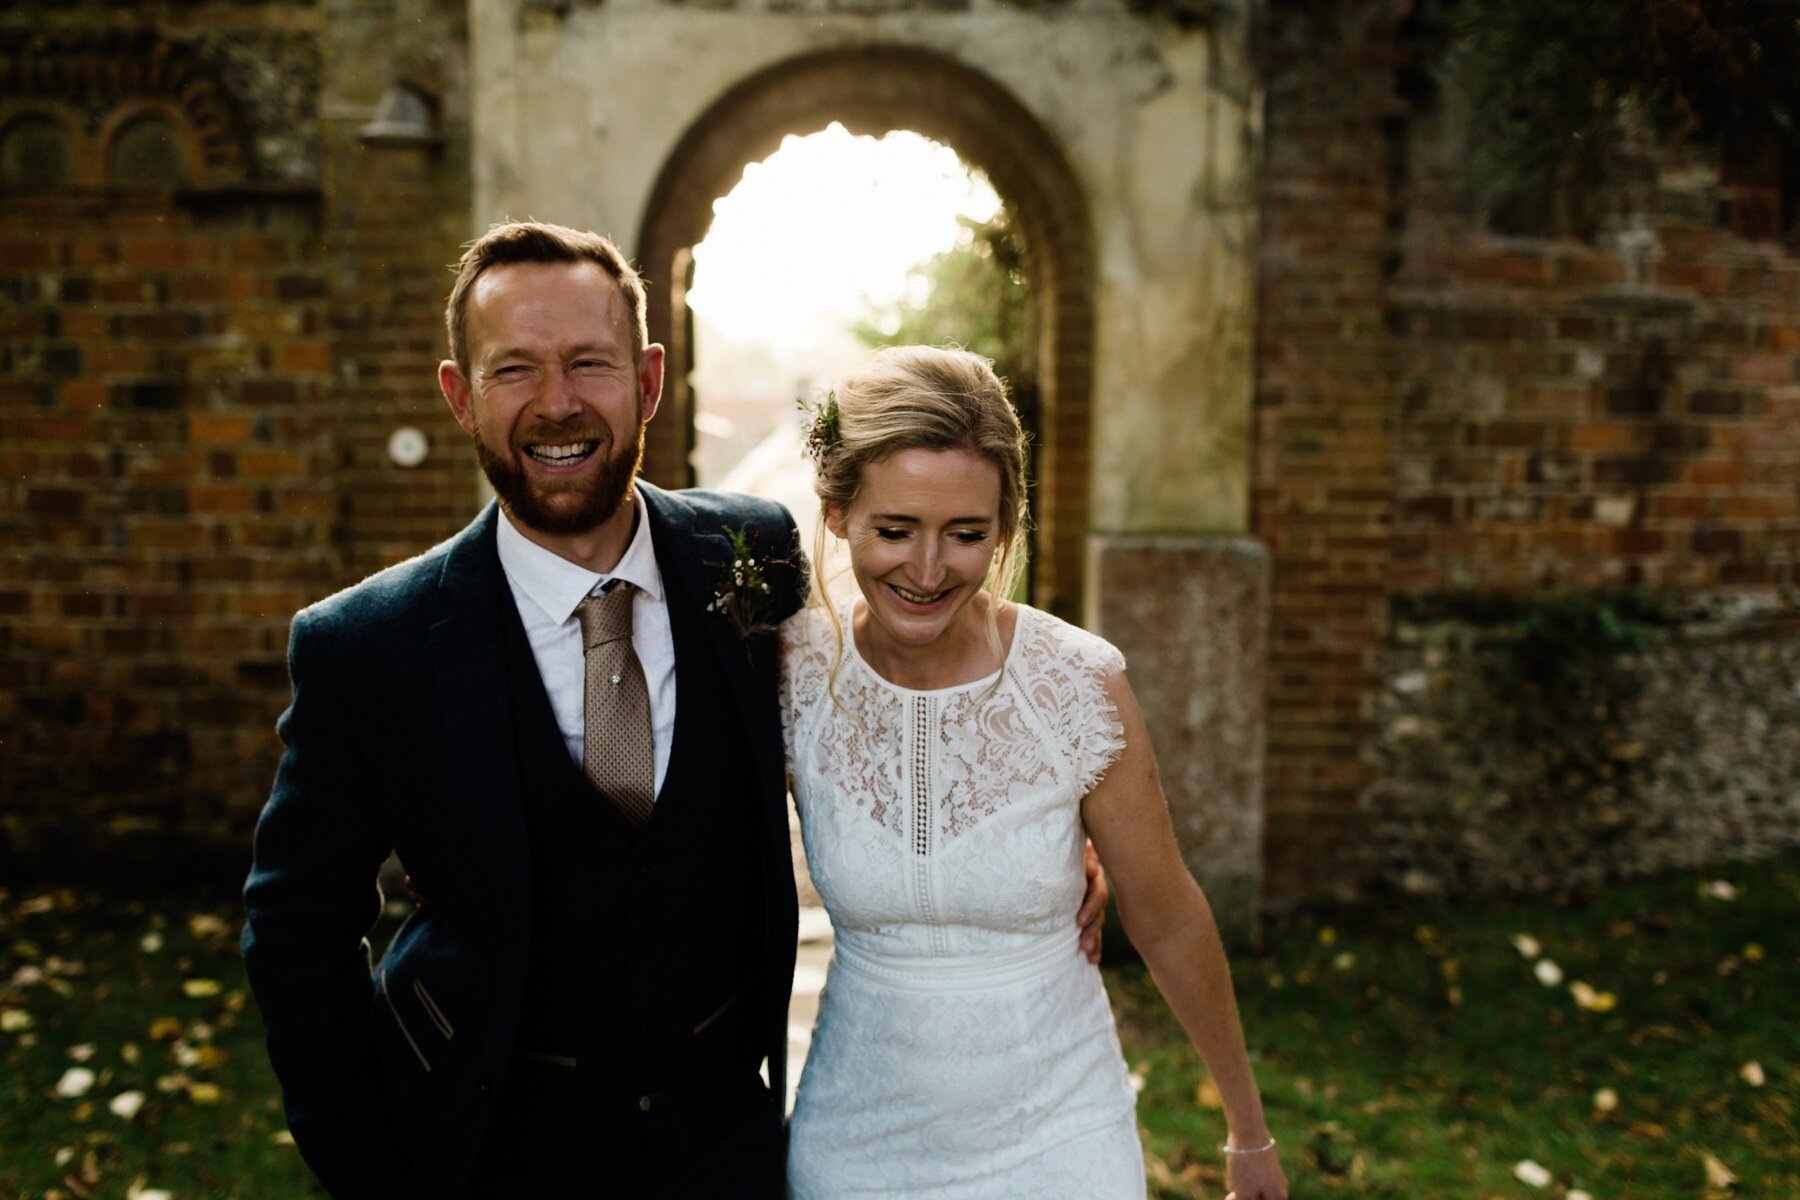 A bride and groom walk together laughing at Horsely Towers wedding venue in Surrey.